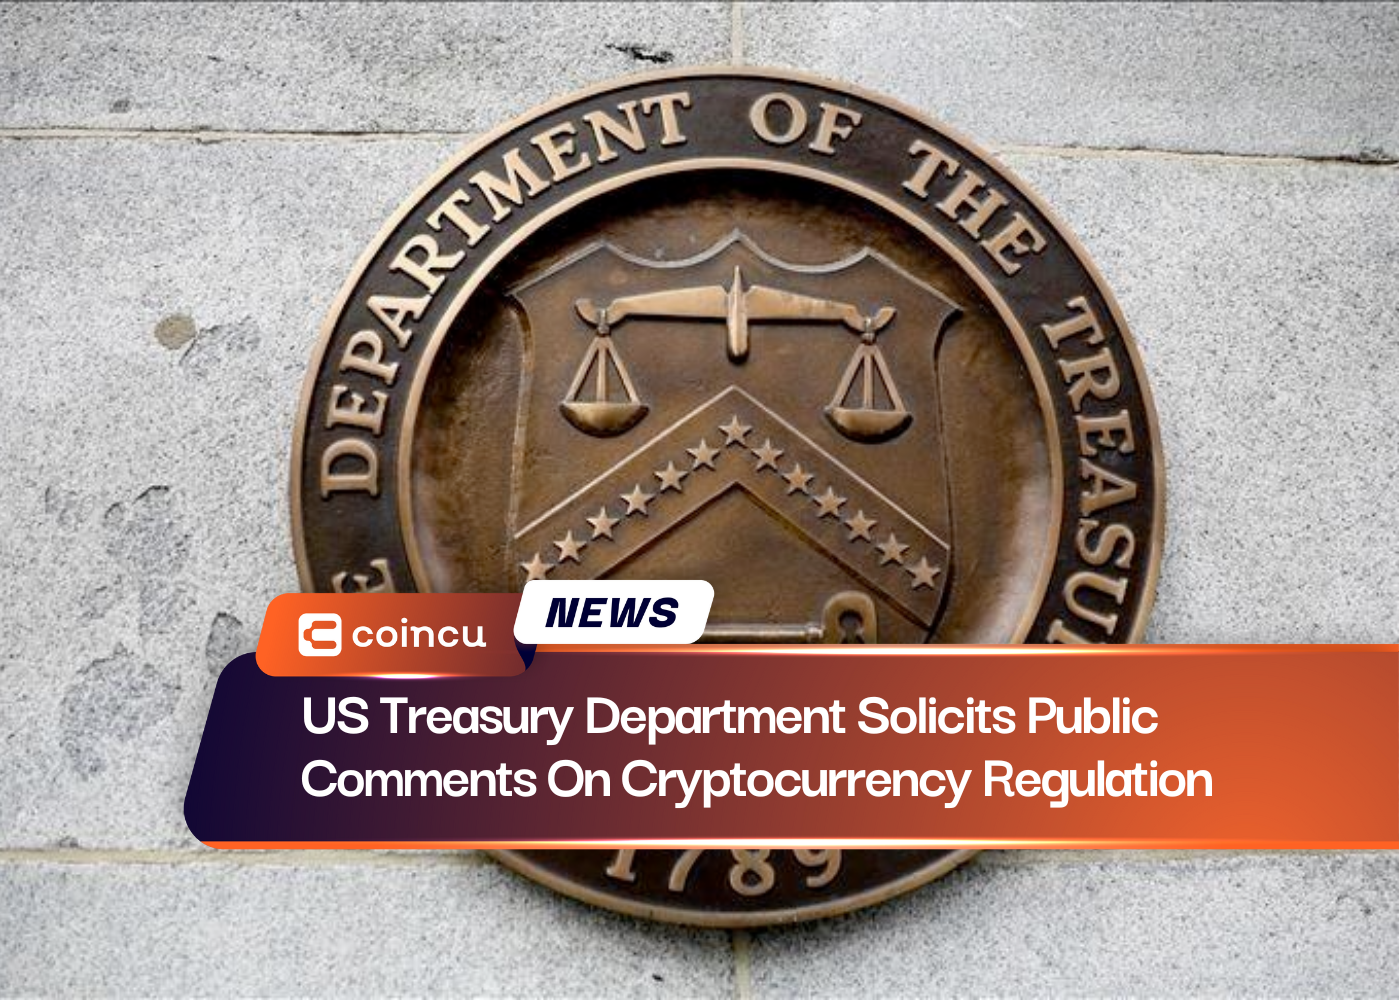 US Treasury Department Solicits Public Comments On Cryptocurrency Regulation